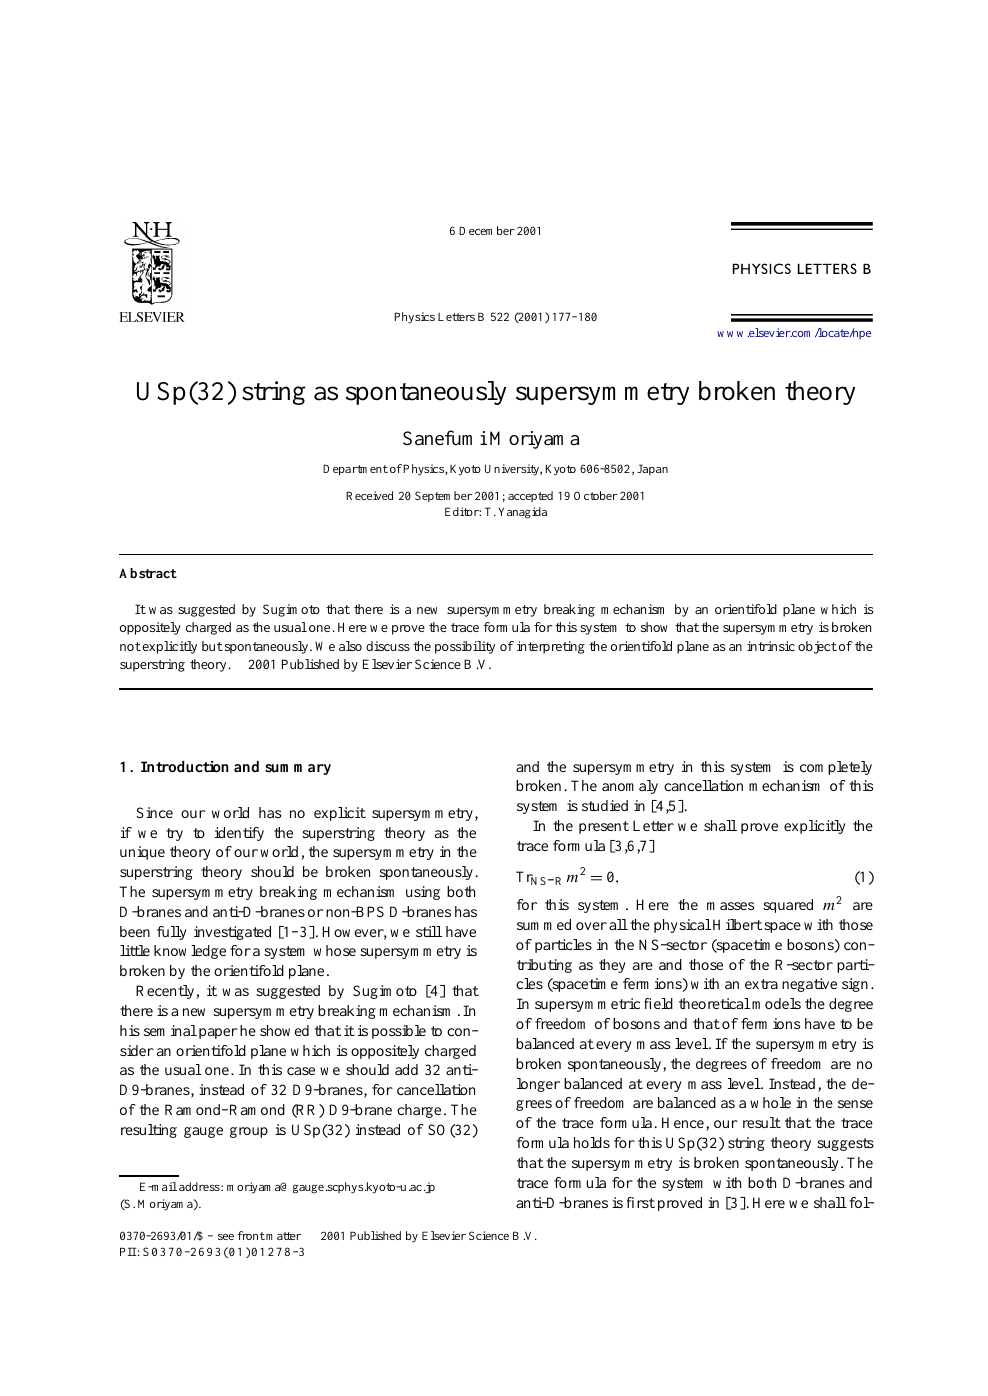 Usp 32 String As Spontaneously Supersymmetry Broken Theory Topic Of Research Paper In Physical Sciences Download Scholarly Article Pdf And Read For Free On Cyberleninka Open Science Hub